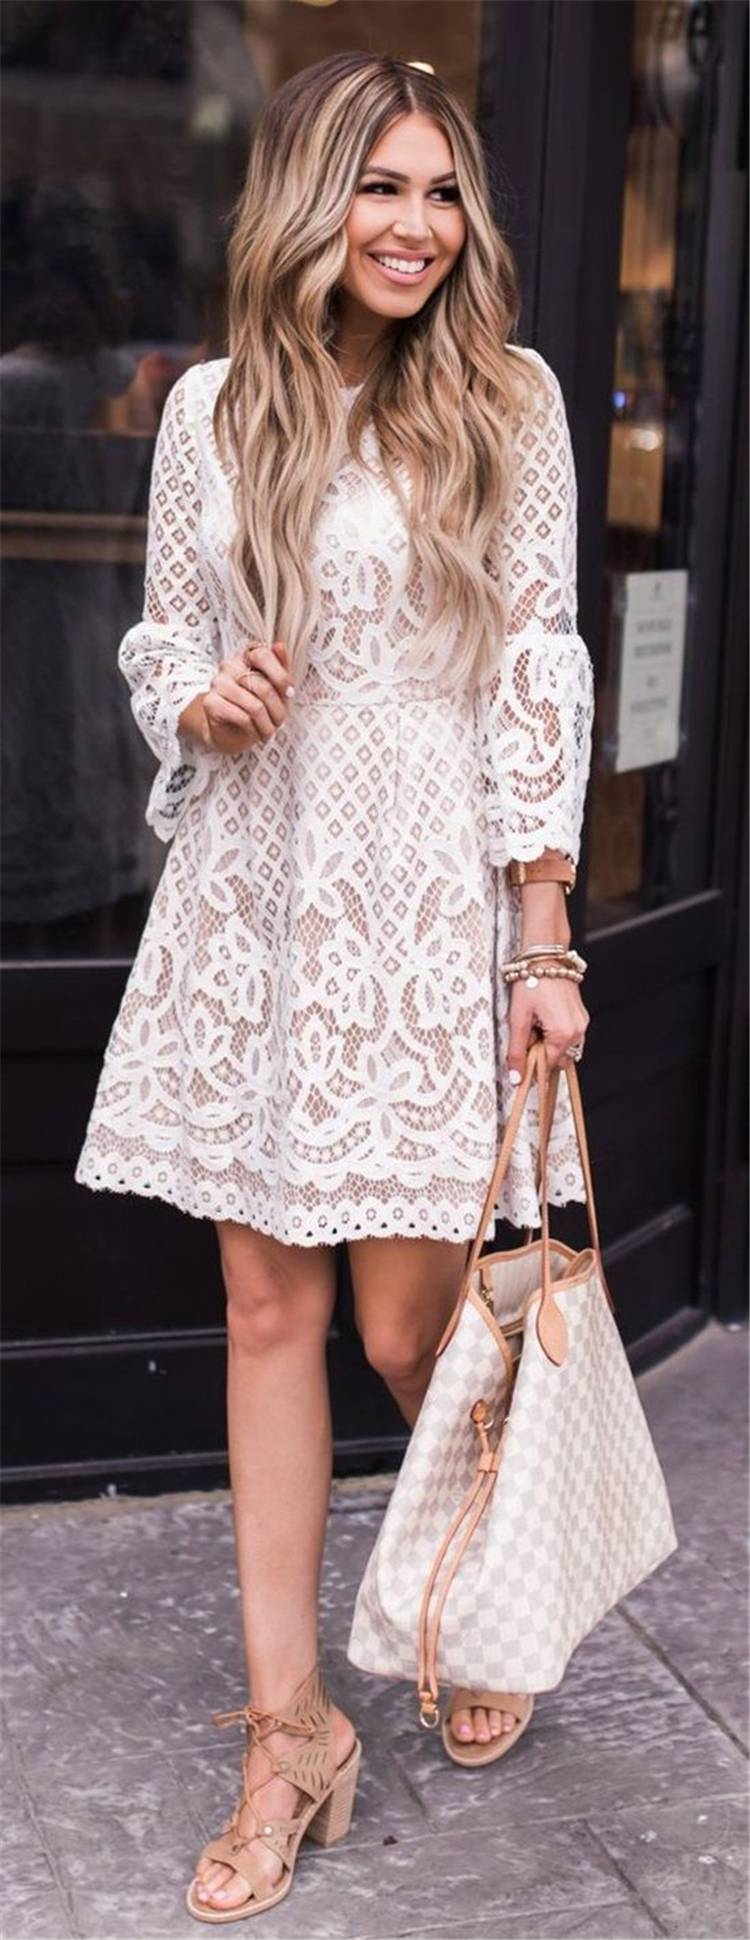 Stunning Spring Work Outfits To Make You Glam; Spring Outfits; Outfits; Spring Skirt; Spring Blouse Outfits; White Shirt Outfits; Spring Lace Dress; Spring Culottes; Cute Spring Outfits; Spring Work Outfits #springoutfits #outfits #springshirtoutfits #springskirt #springculottes #springlacedress #whiteshirt